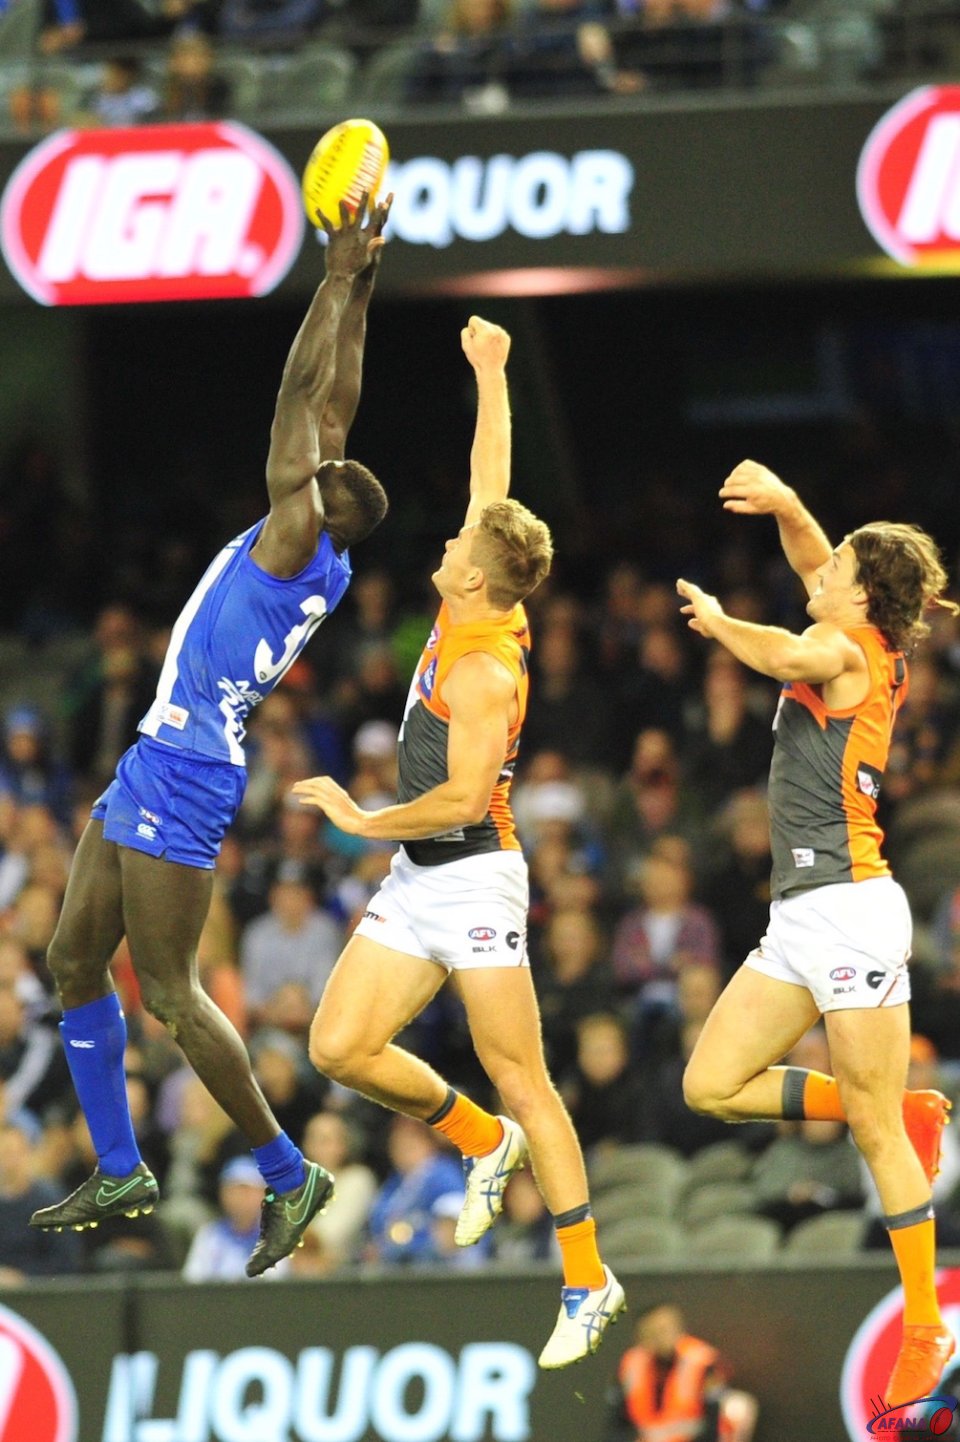 Majak Daw marks with great courage as the Giant's defenders close in for the spoil